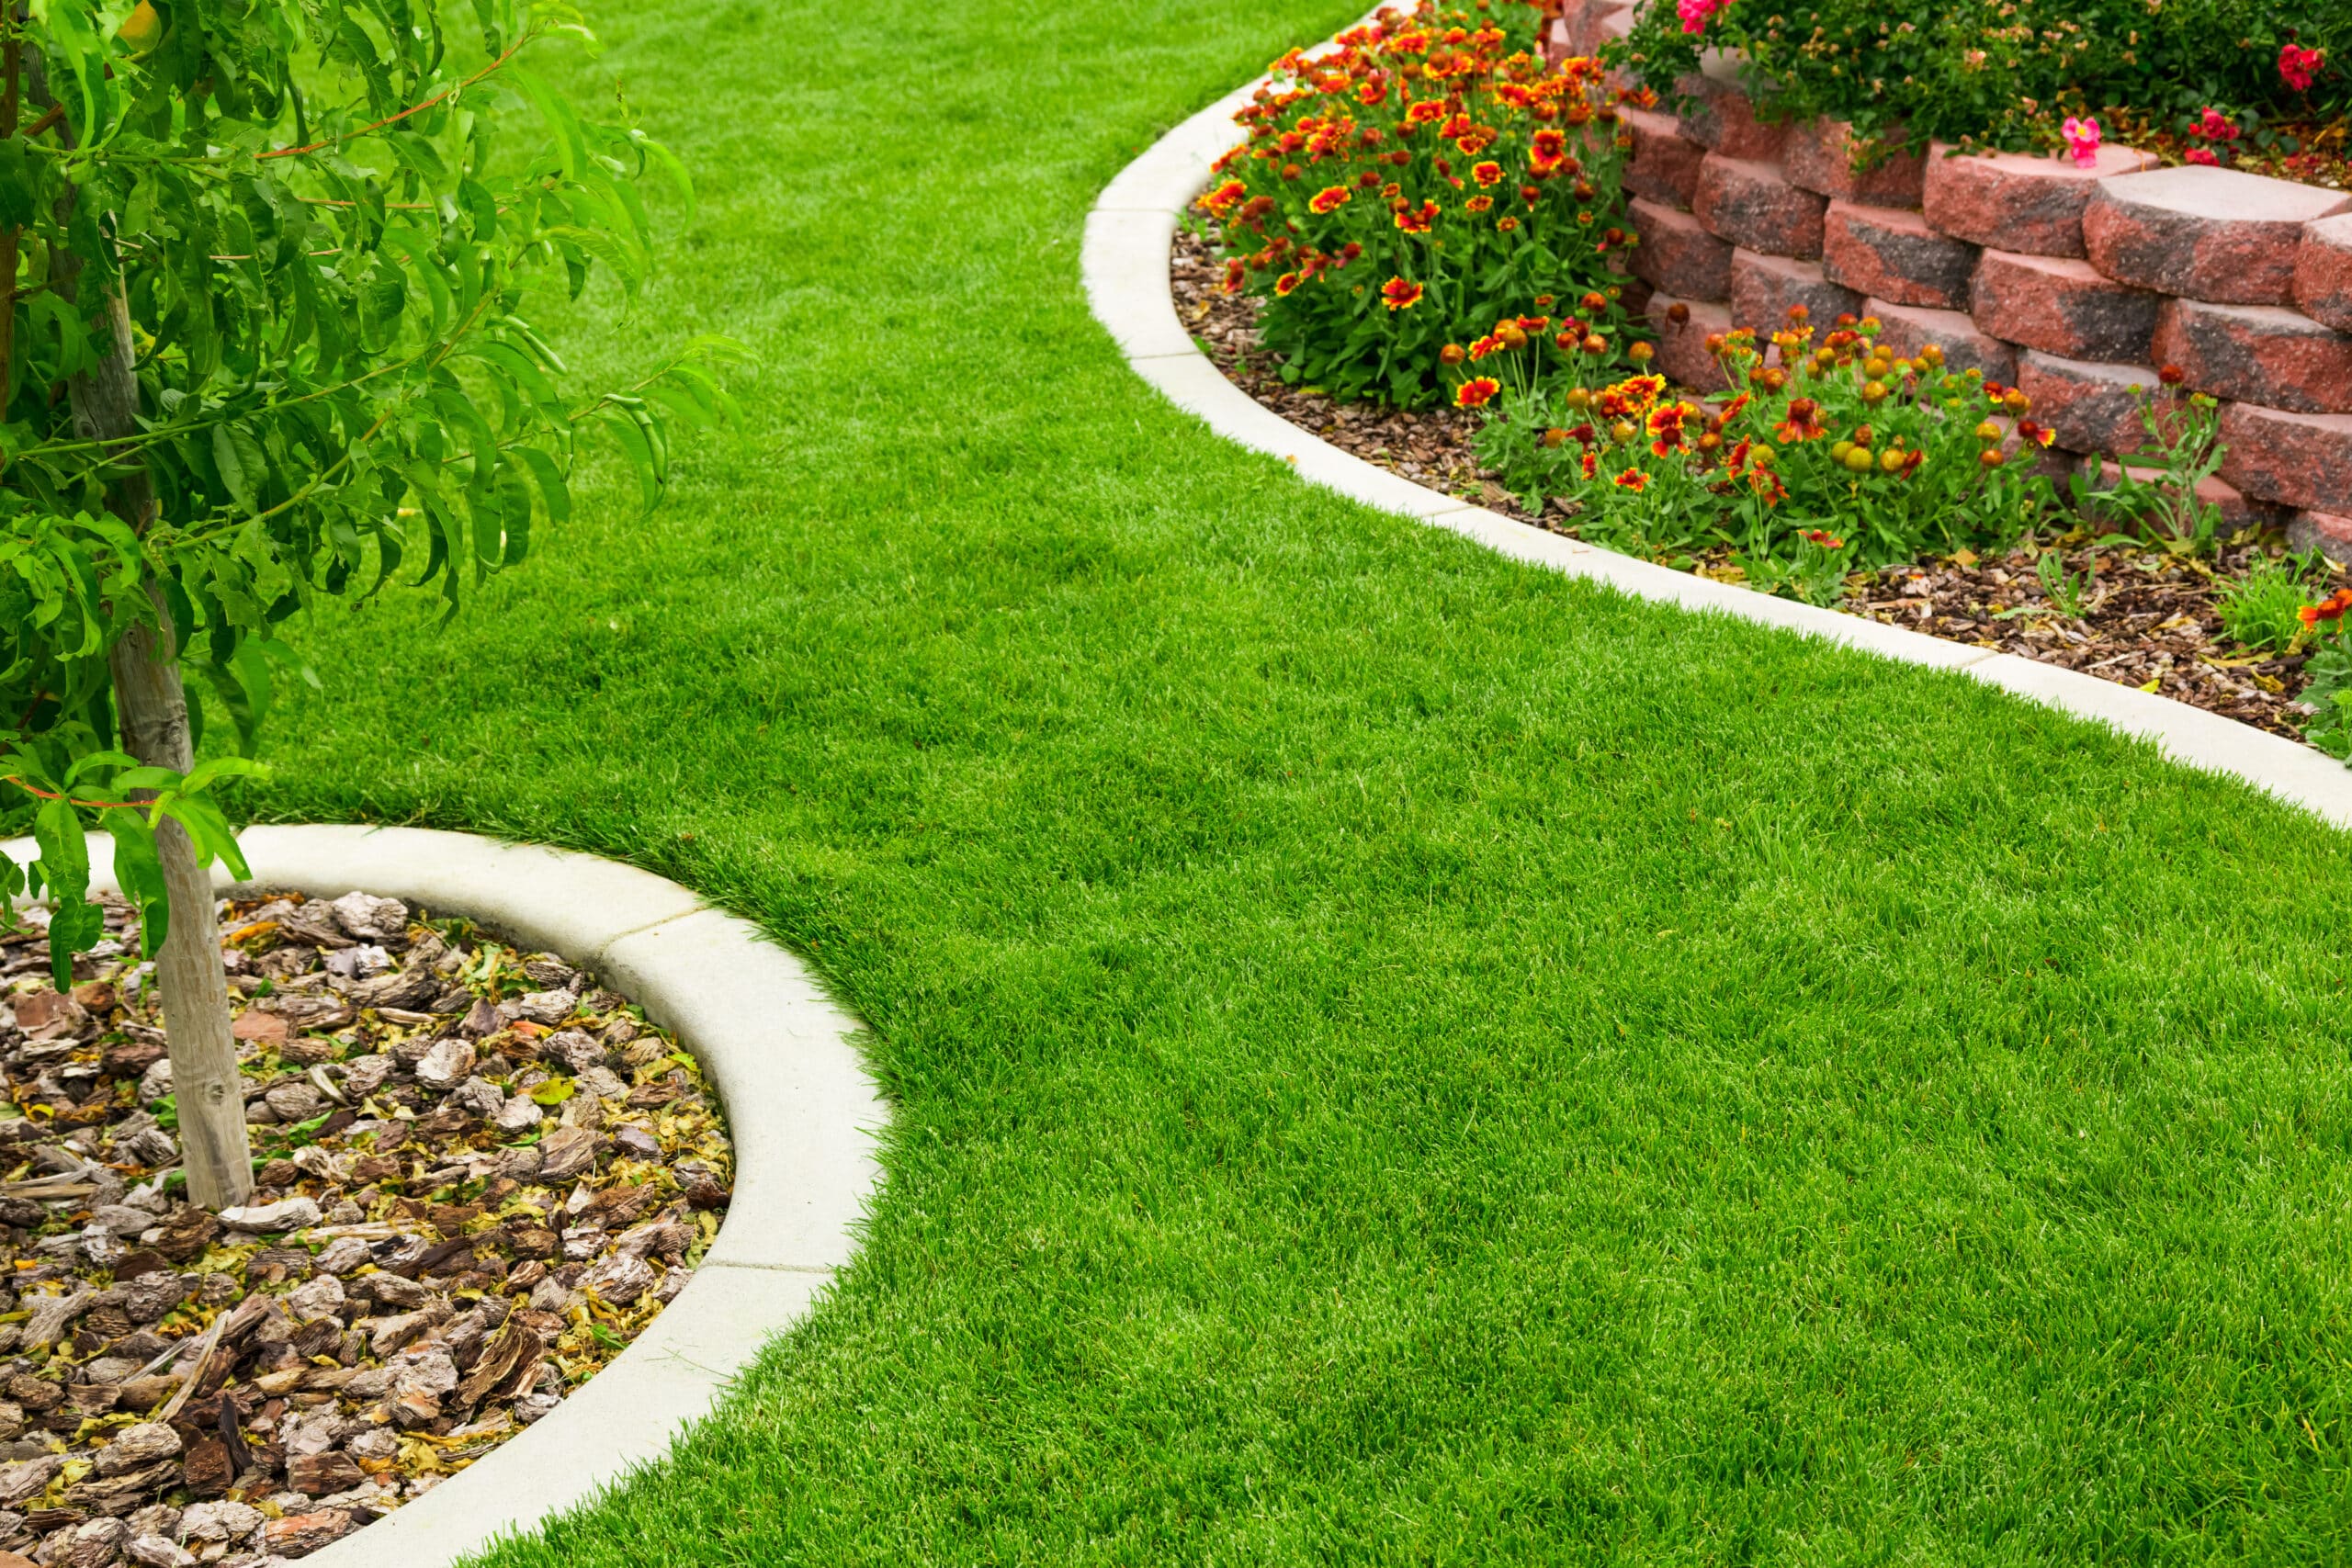 sod installation ads aesthetic appeal to your Southlake, TX, home